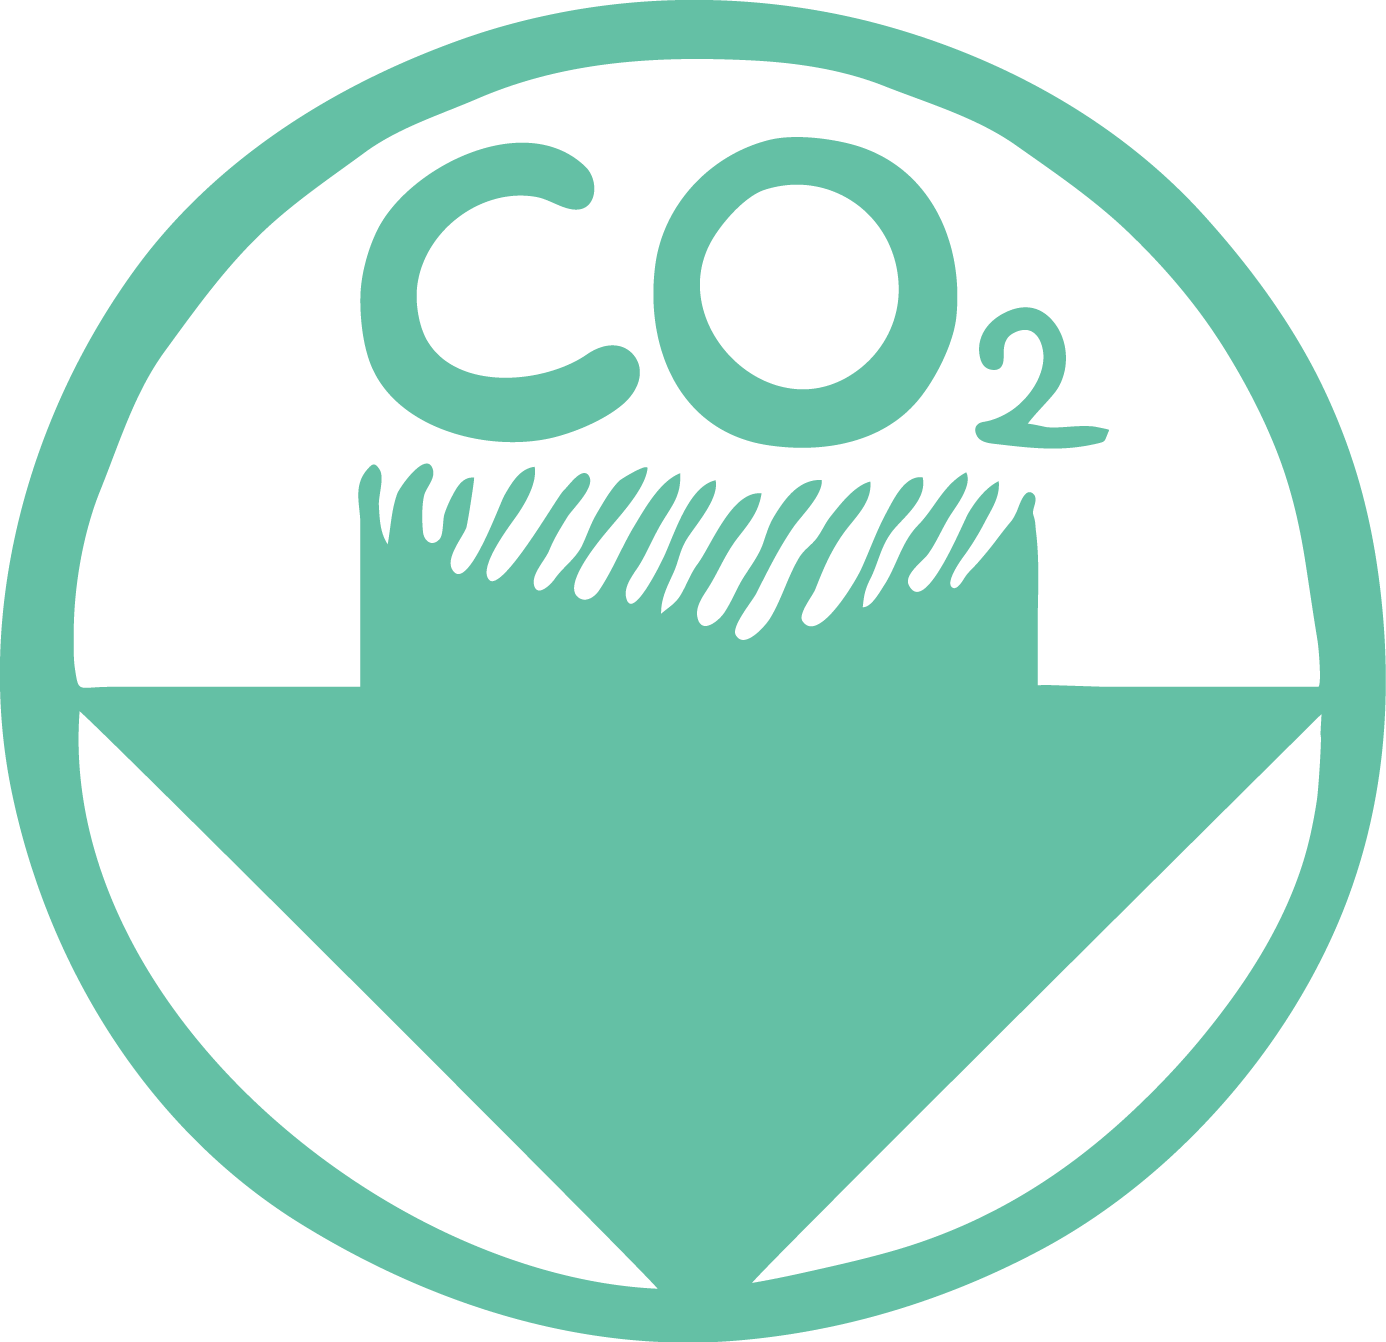 icons%20-%20Low%20Emissions%20-%20green.png?1610631114507